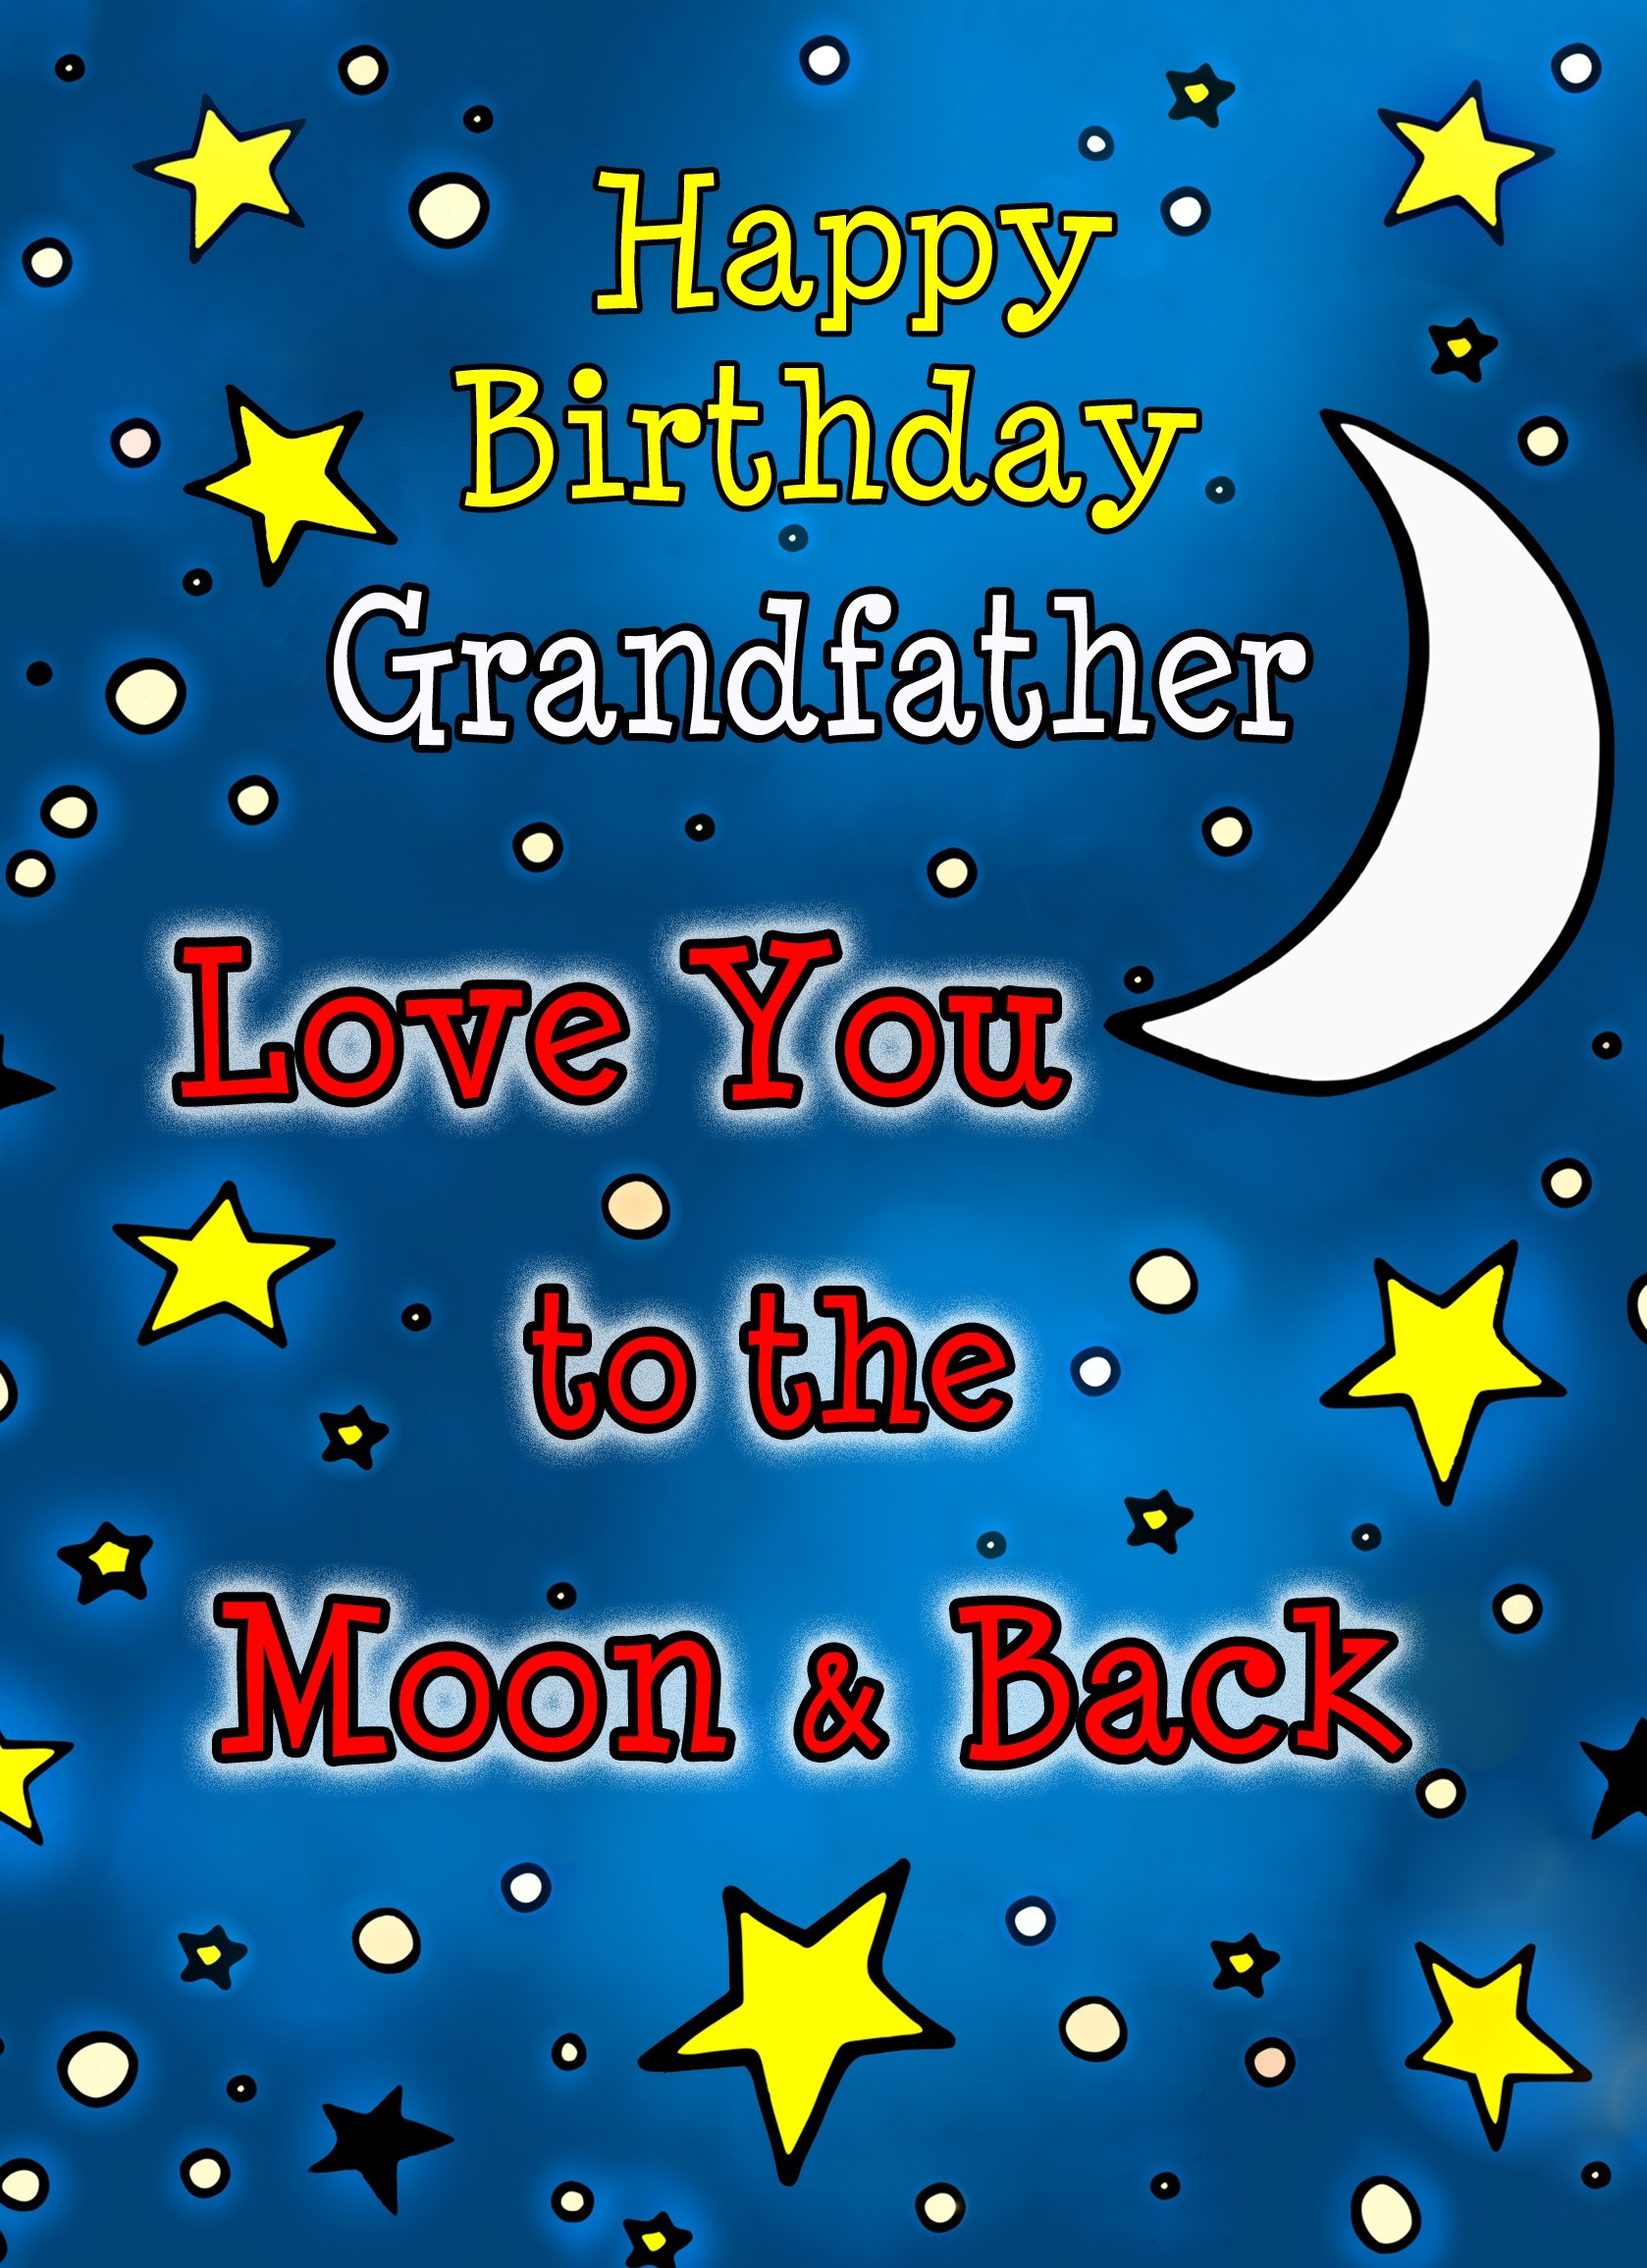 Birthday Card for Grandfather (Moon and Back) 